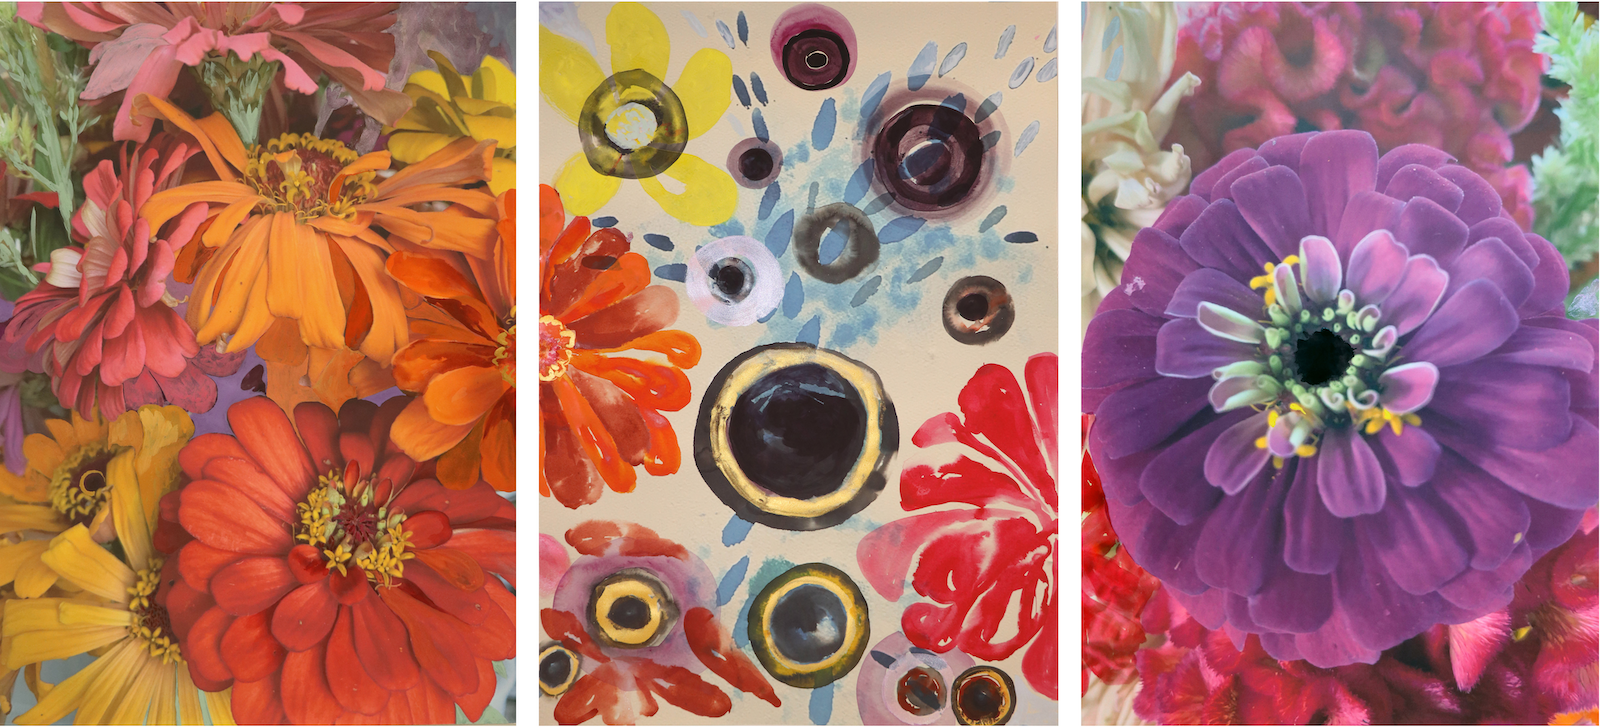 There are three sections of this painting, all consisting of close-ups of colorful flowers. The first panel shows flowers in reds, oranges, pinks and yellows with lush petals, the second panel is more simplistic flowers with black centers, the third is a closeup of a realistic purple flower.